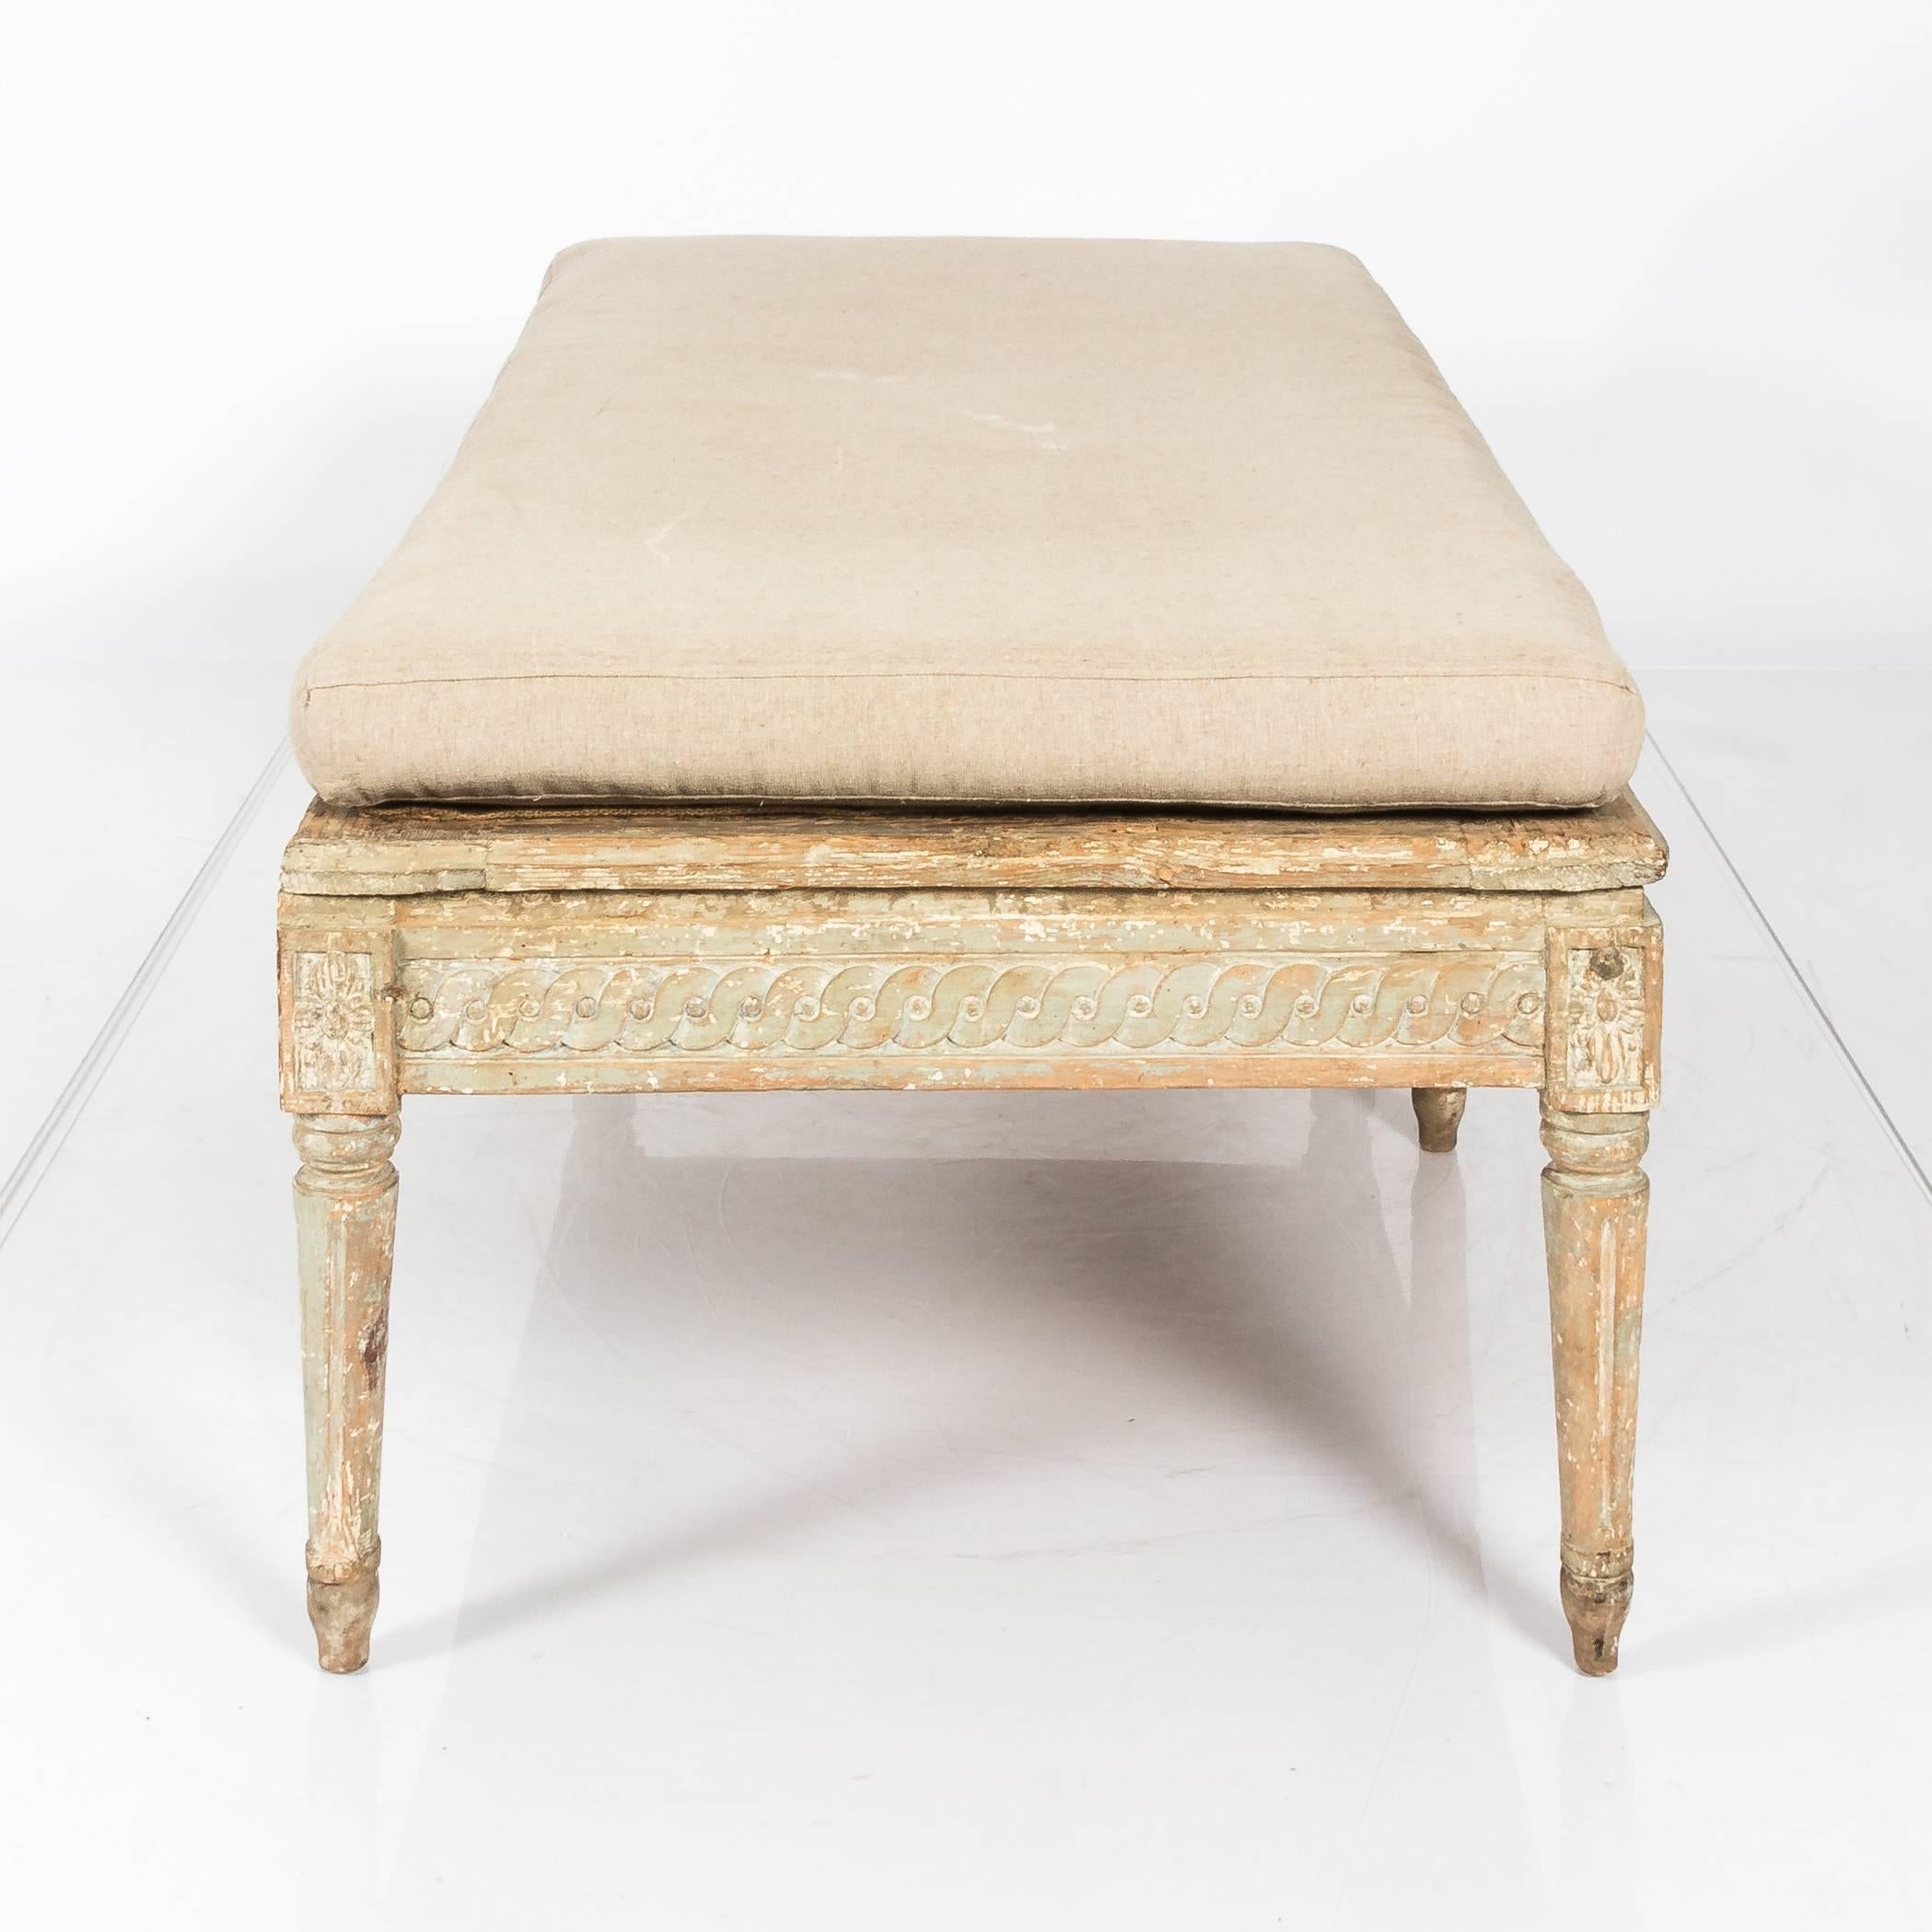 Late 19th century Swedish white-painted Gustavian-style bench.
 